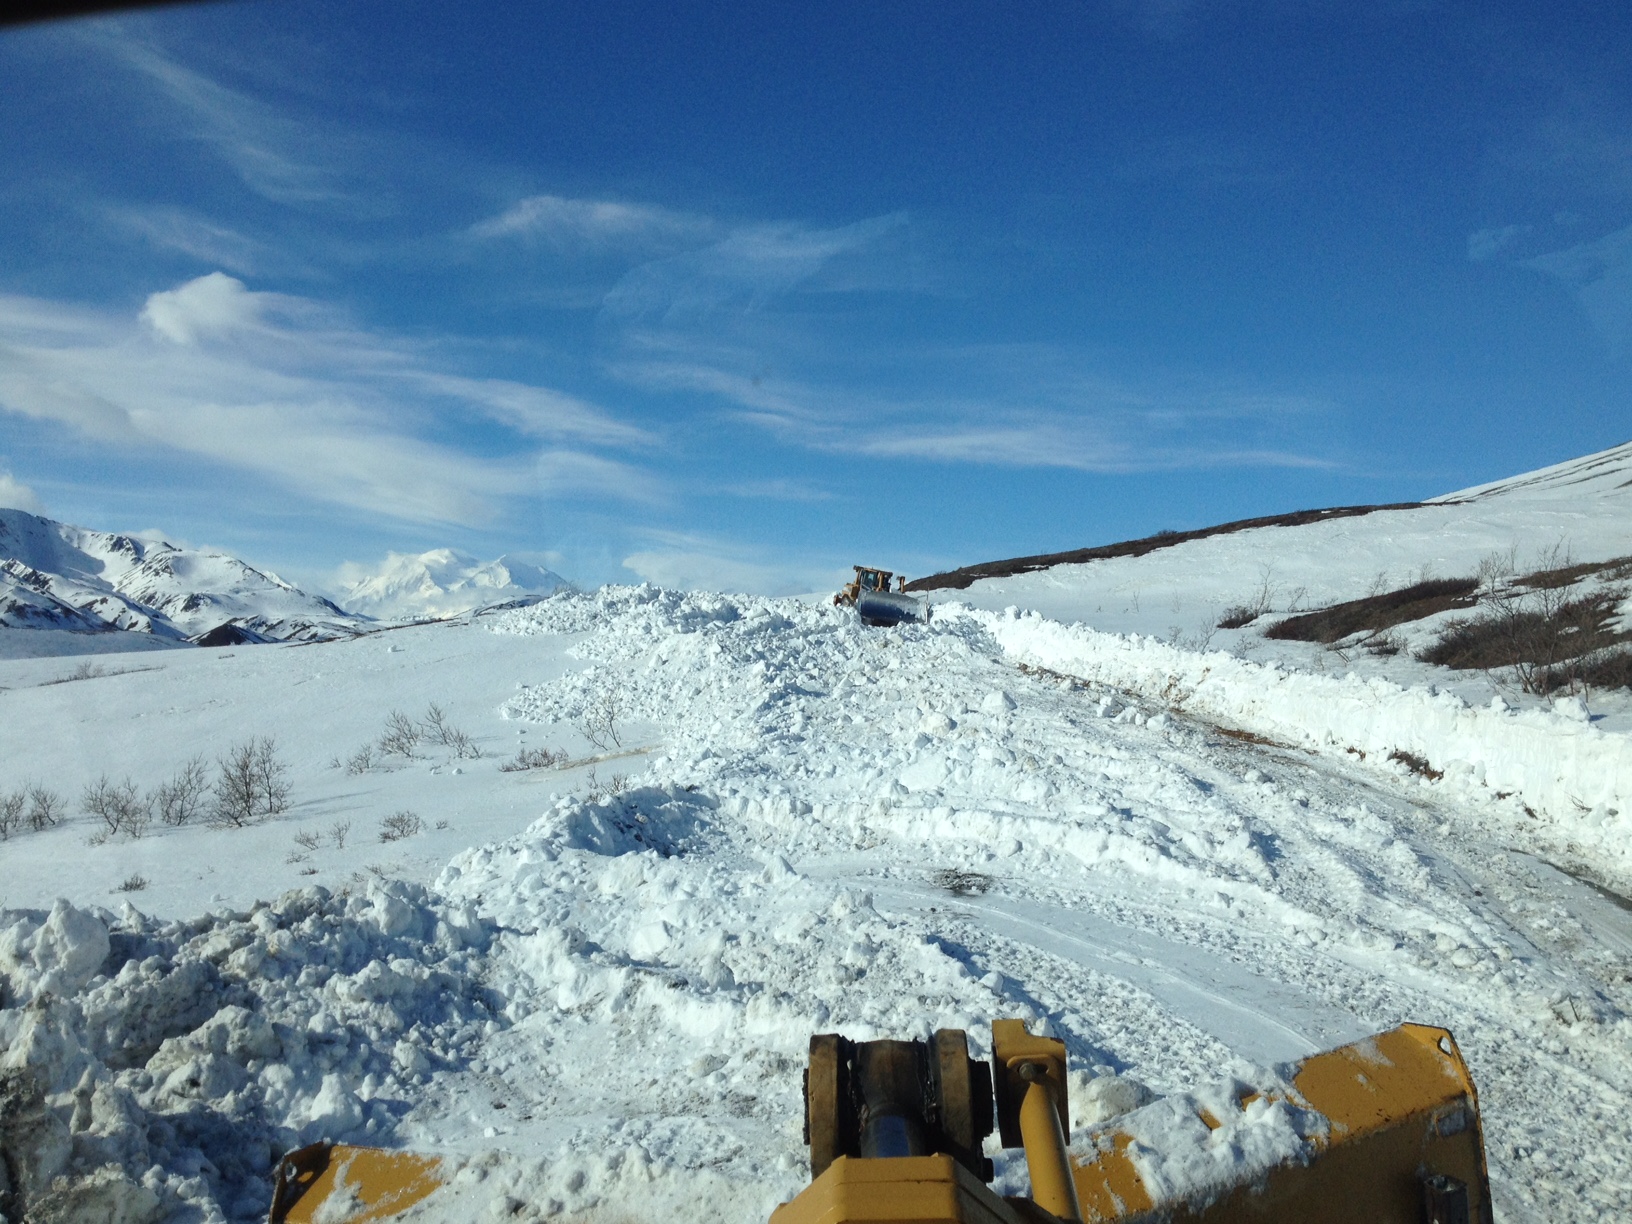 two large machines plow a snowy road on a hillside under a beautiful blue sky